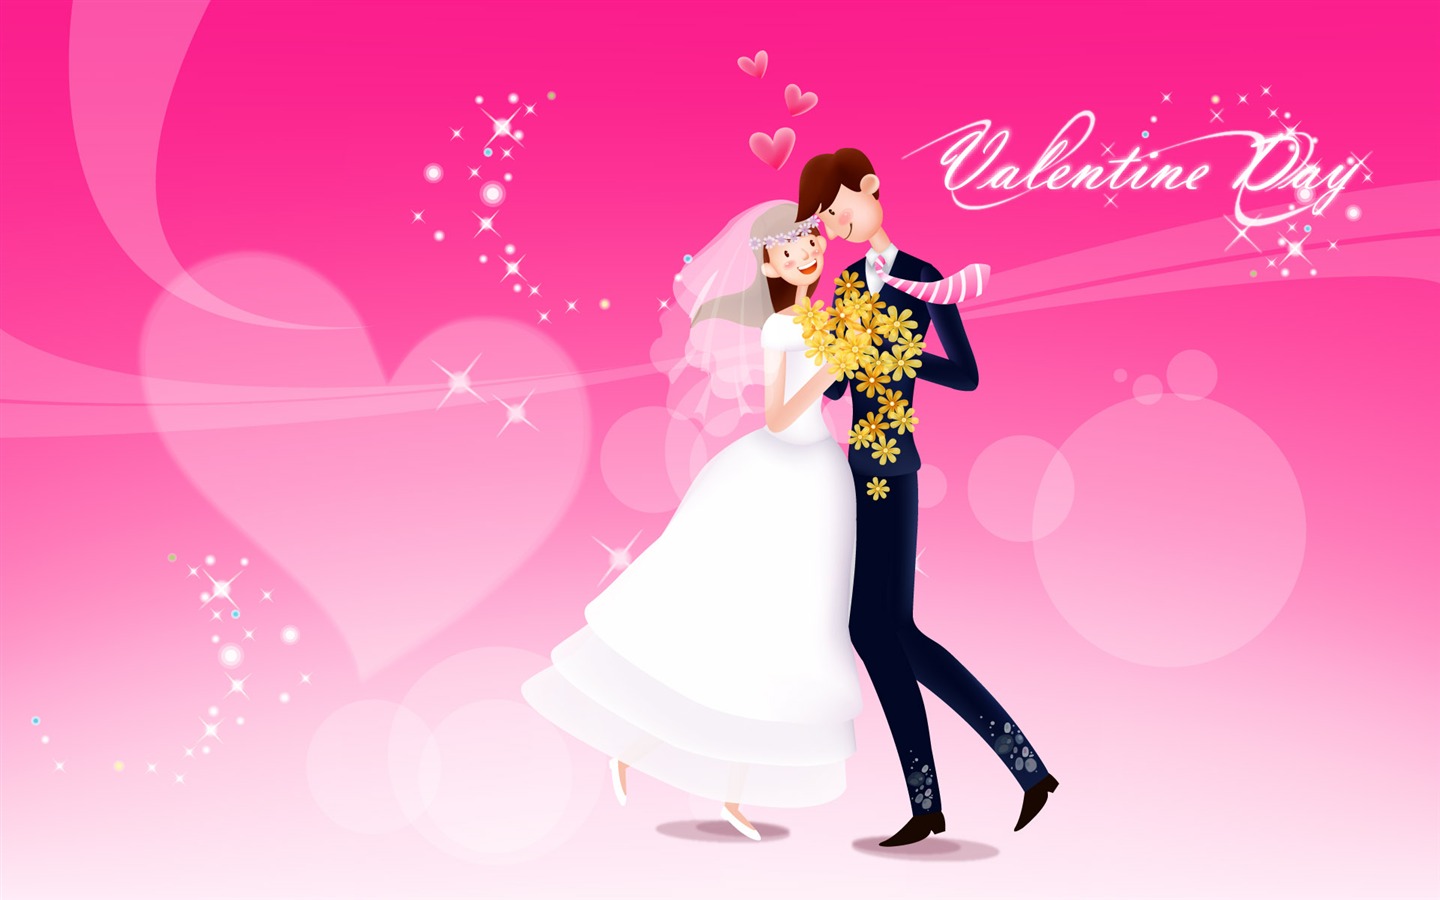 Valentine's Day Theme Wallpapers (2) #16 - 1440x900